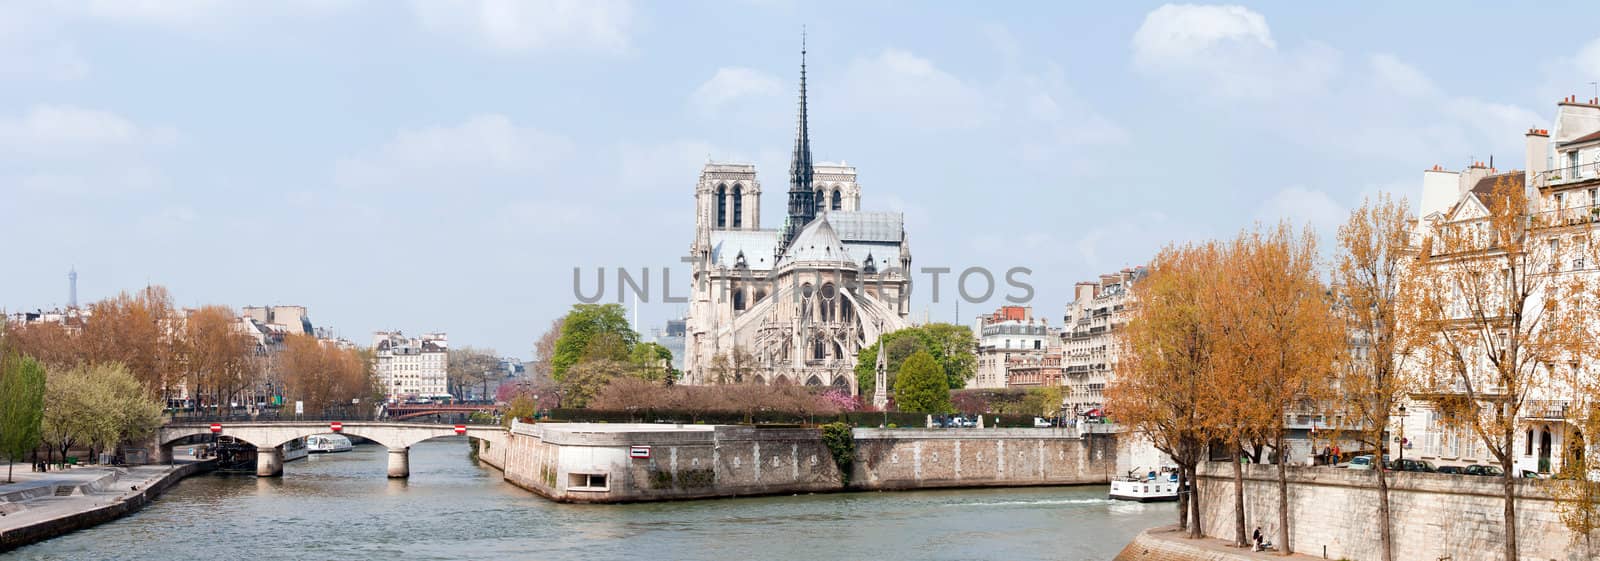 Paris Cathedral Notre Dame Panorama by vichie81